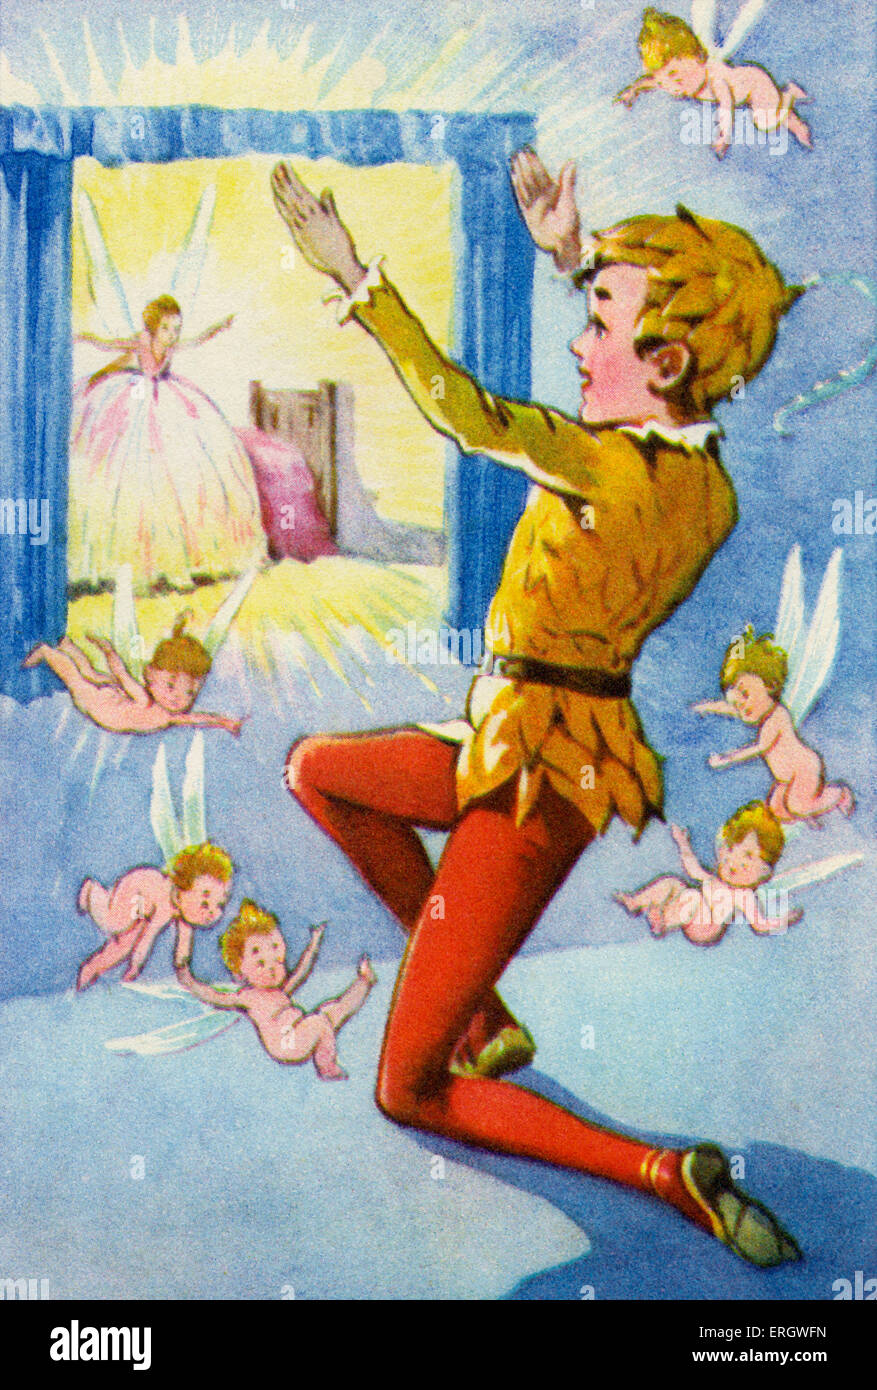 'Peter Pan and Wendy' by James Matthew Barrie. Peter Pan saves Tinker Bell. 'Do you believe in fairies: Claop your hands if you Stock Photo